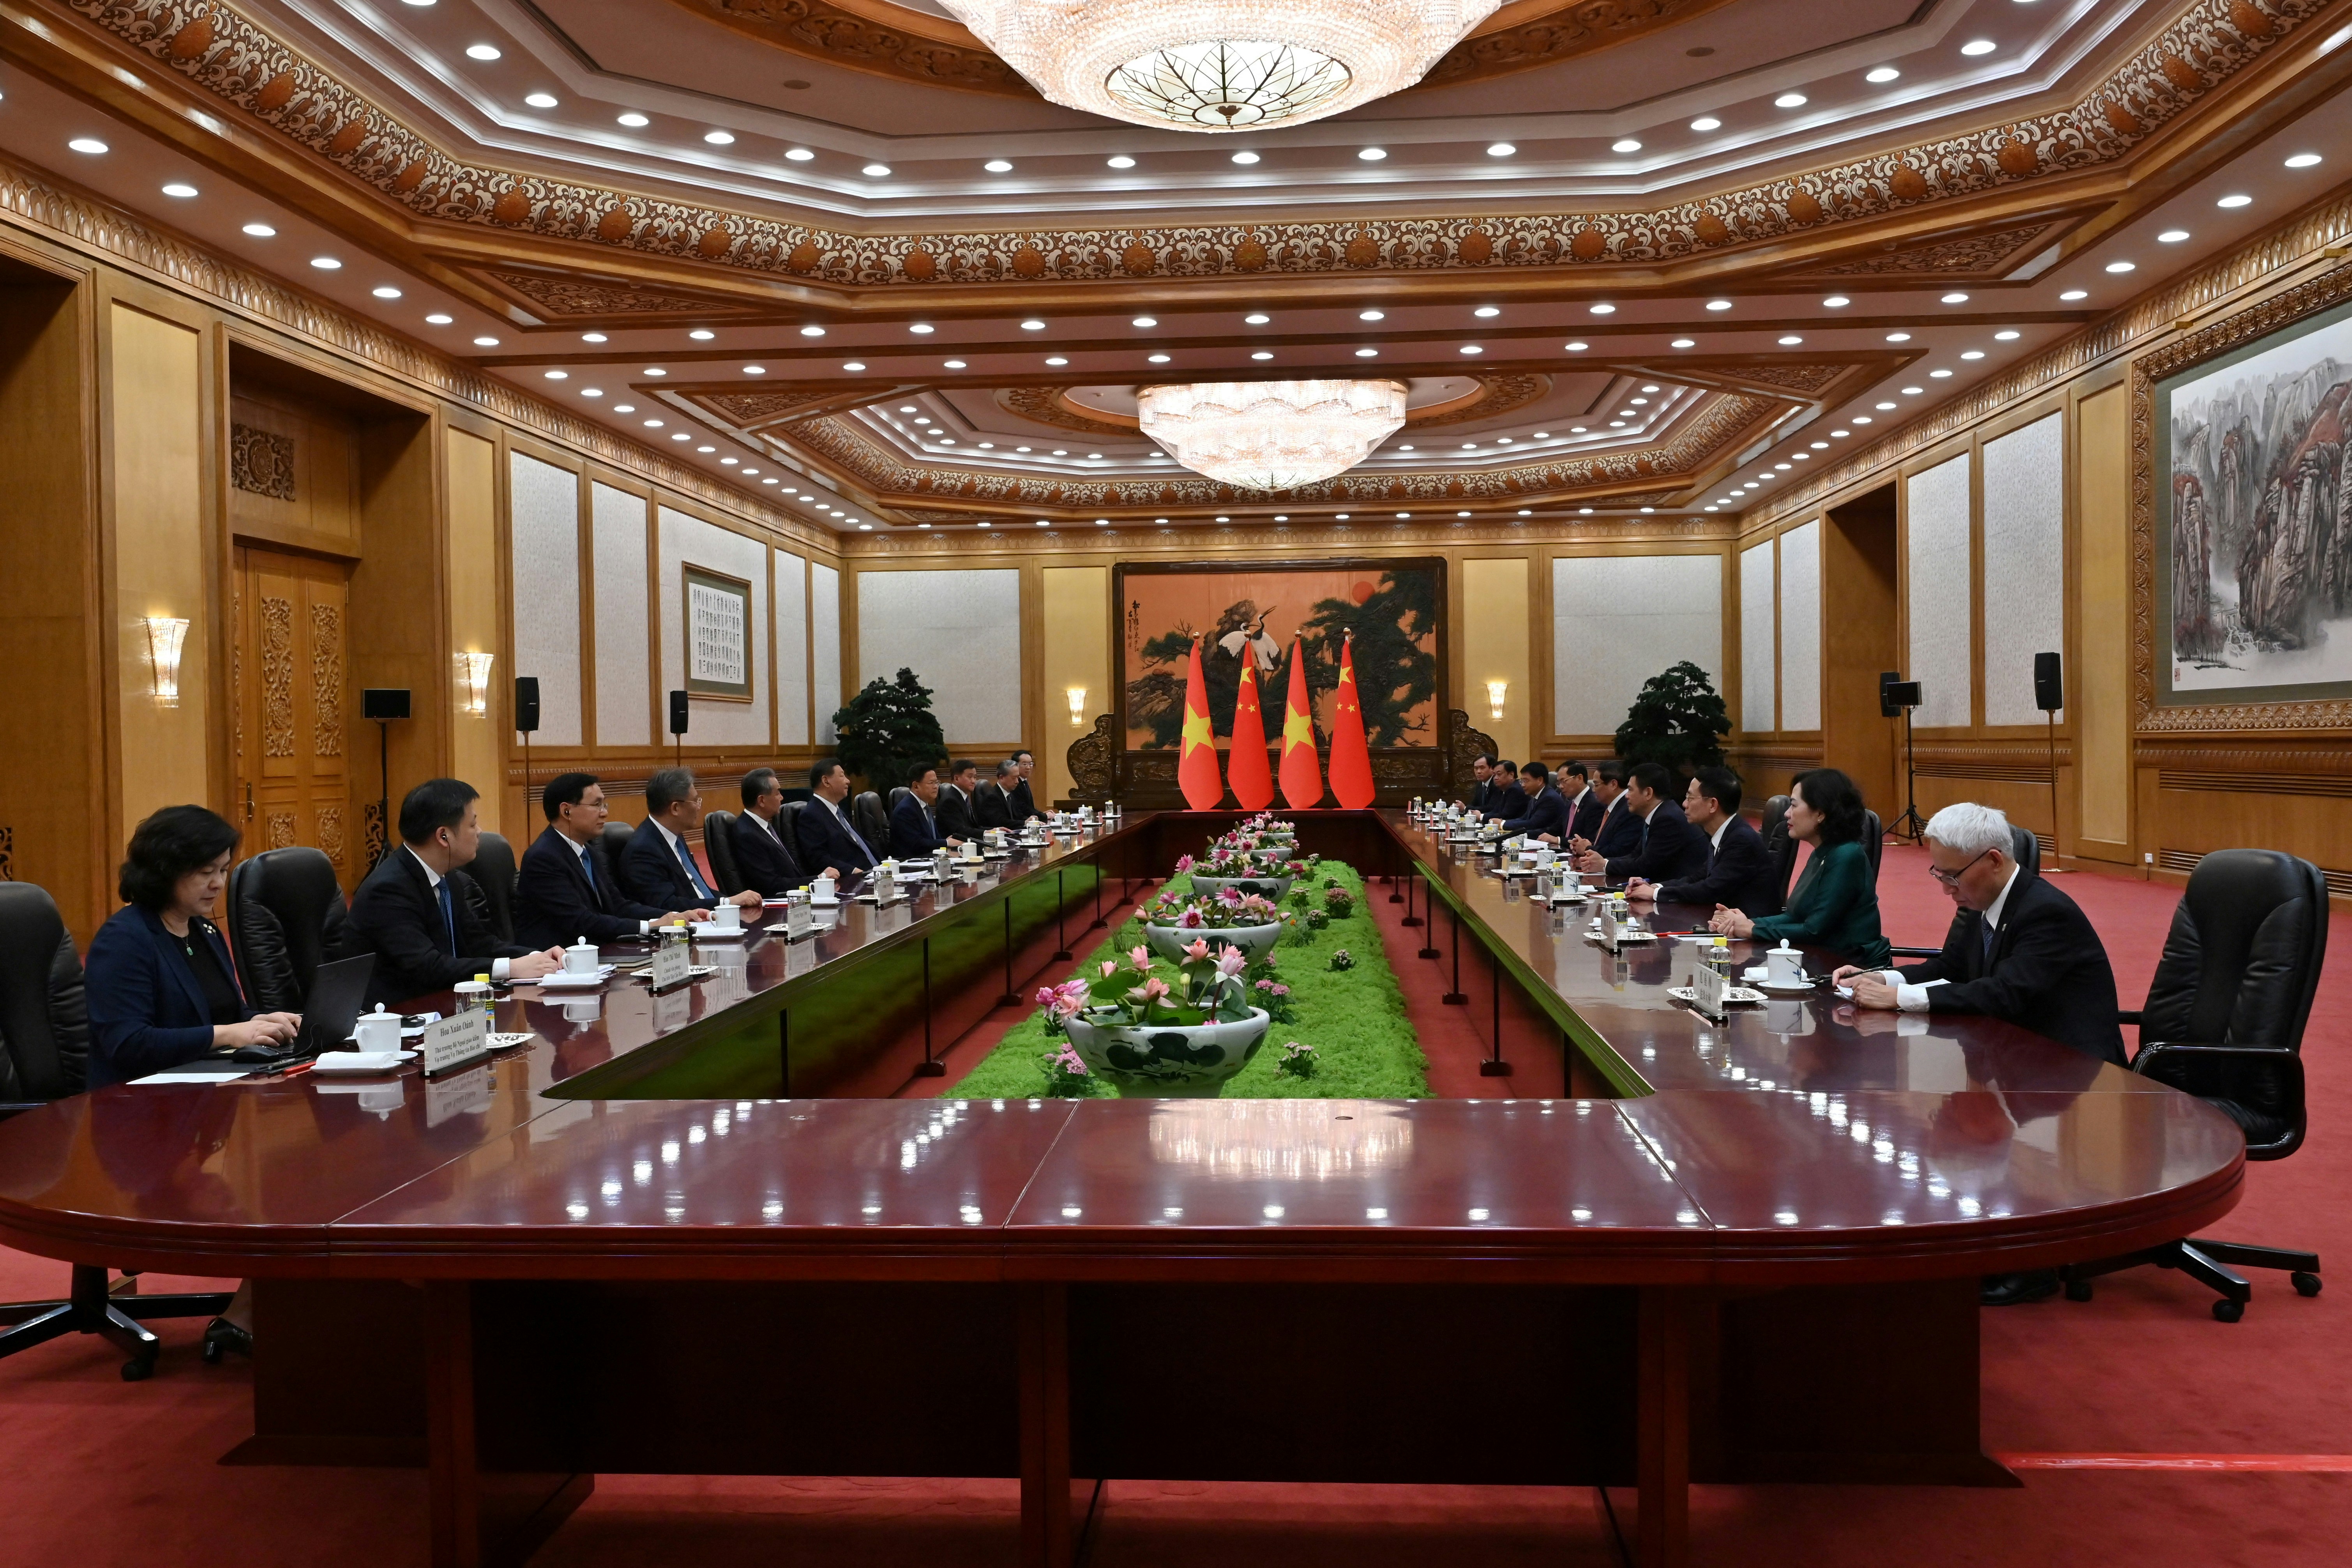 On June 26, 2024, Chinese President Xi Jinping, Foreign Minister Wang Yi and Vietnamese Prime Minister Pham Minh were attending a bilateral meeting at the Great Hall of the People in Beijing. (Reuters)